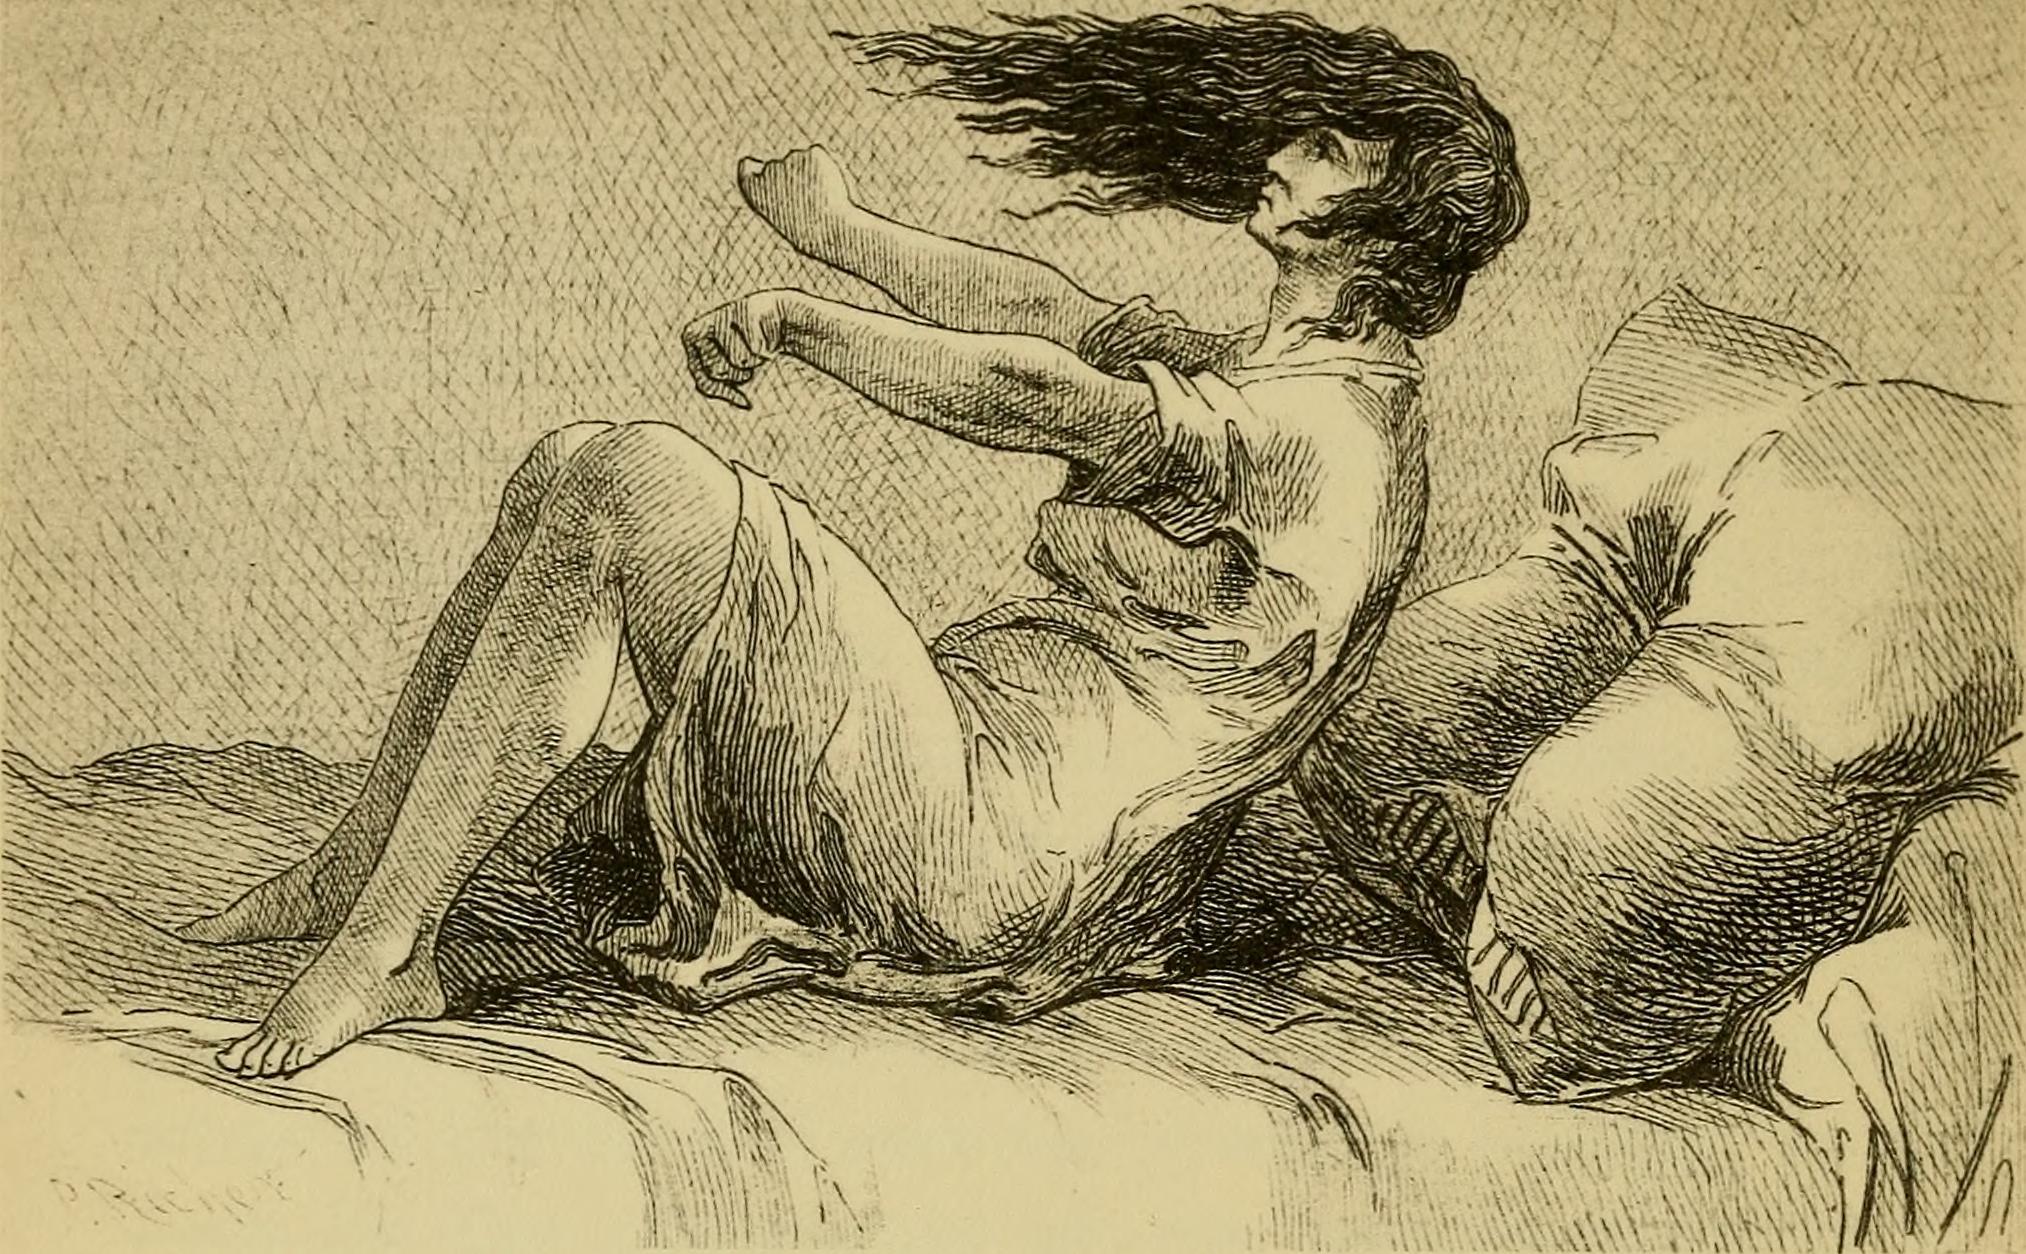 https://upload.wikimedia.org/wikipedia/commons/b/bd/Hysteria_and_certain_allied_conditions%2C_their_nature_and_treatment%2C_with_special_reference_to_the_application_of_the_rest_cure%2C_massage%2C_electrotherapy%2C_hypnotism%2C_etc_%281897%29_%2814804495743%29.jpg